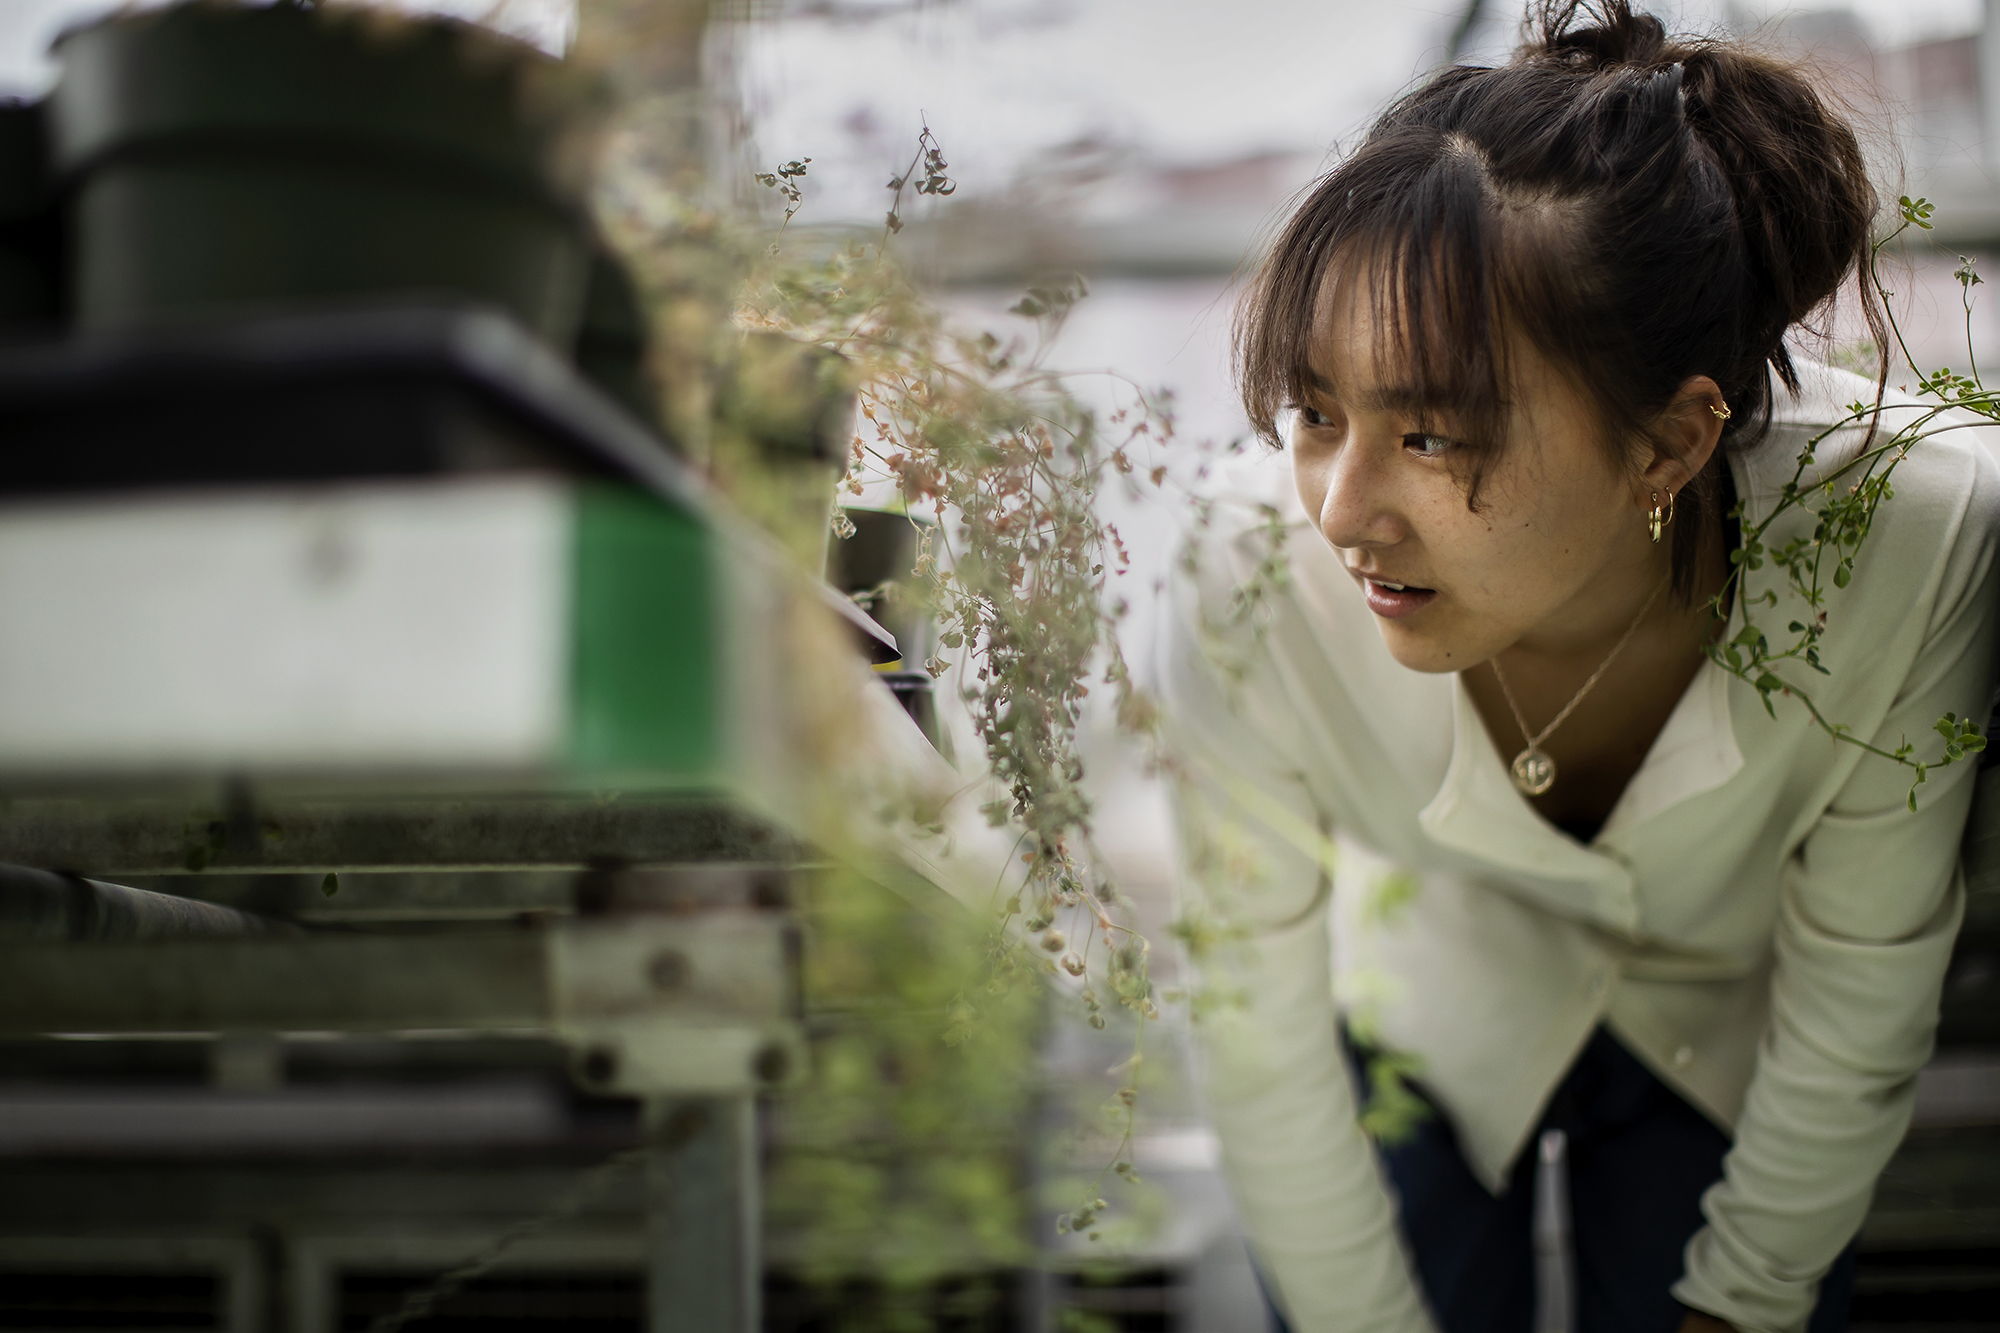 Linda Wu closely examines a trailing plant in a greenhouse